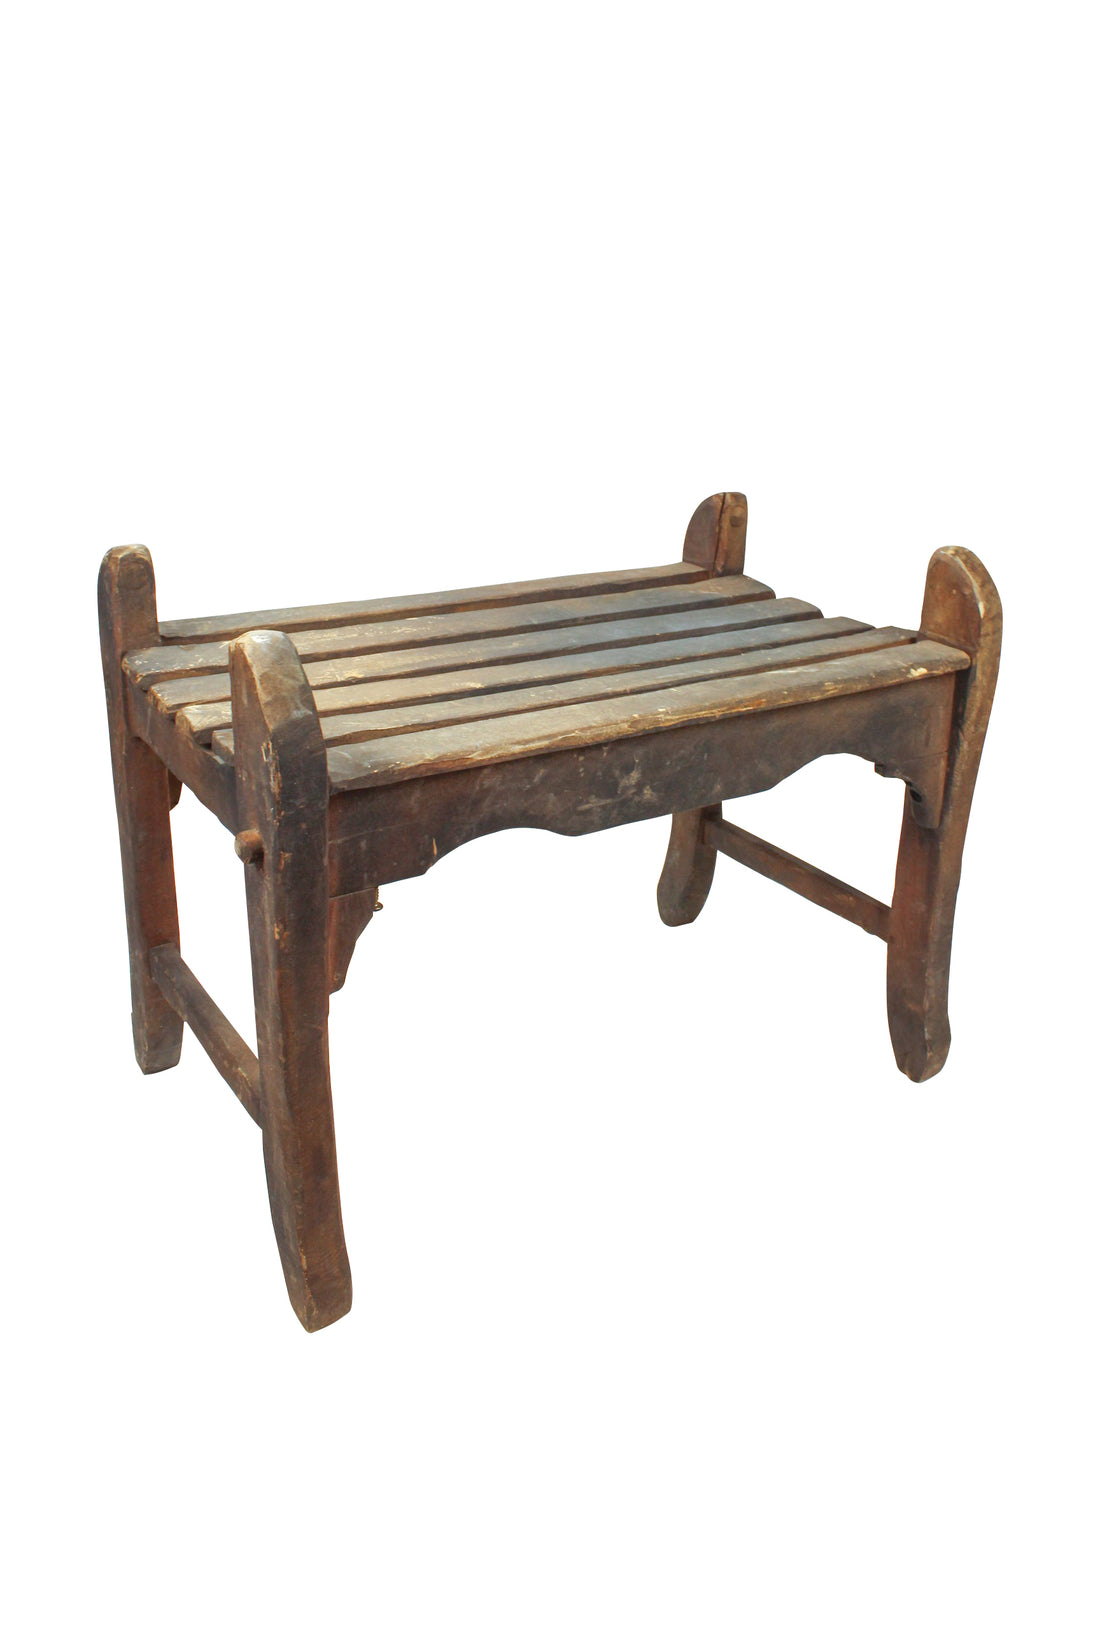 Rustic Slotted Bench